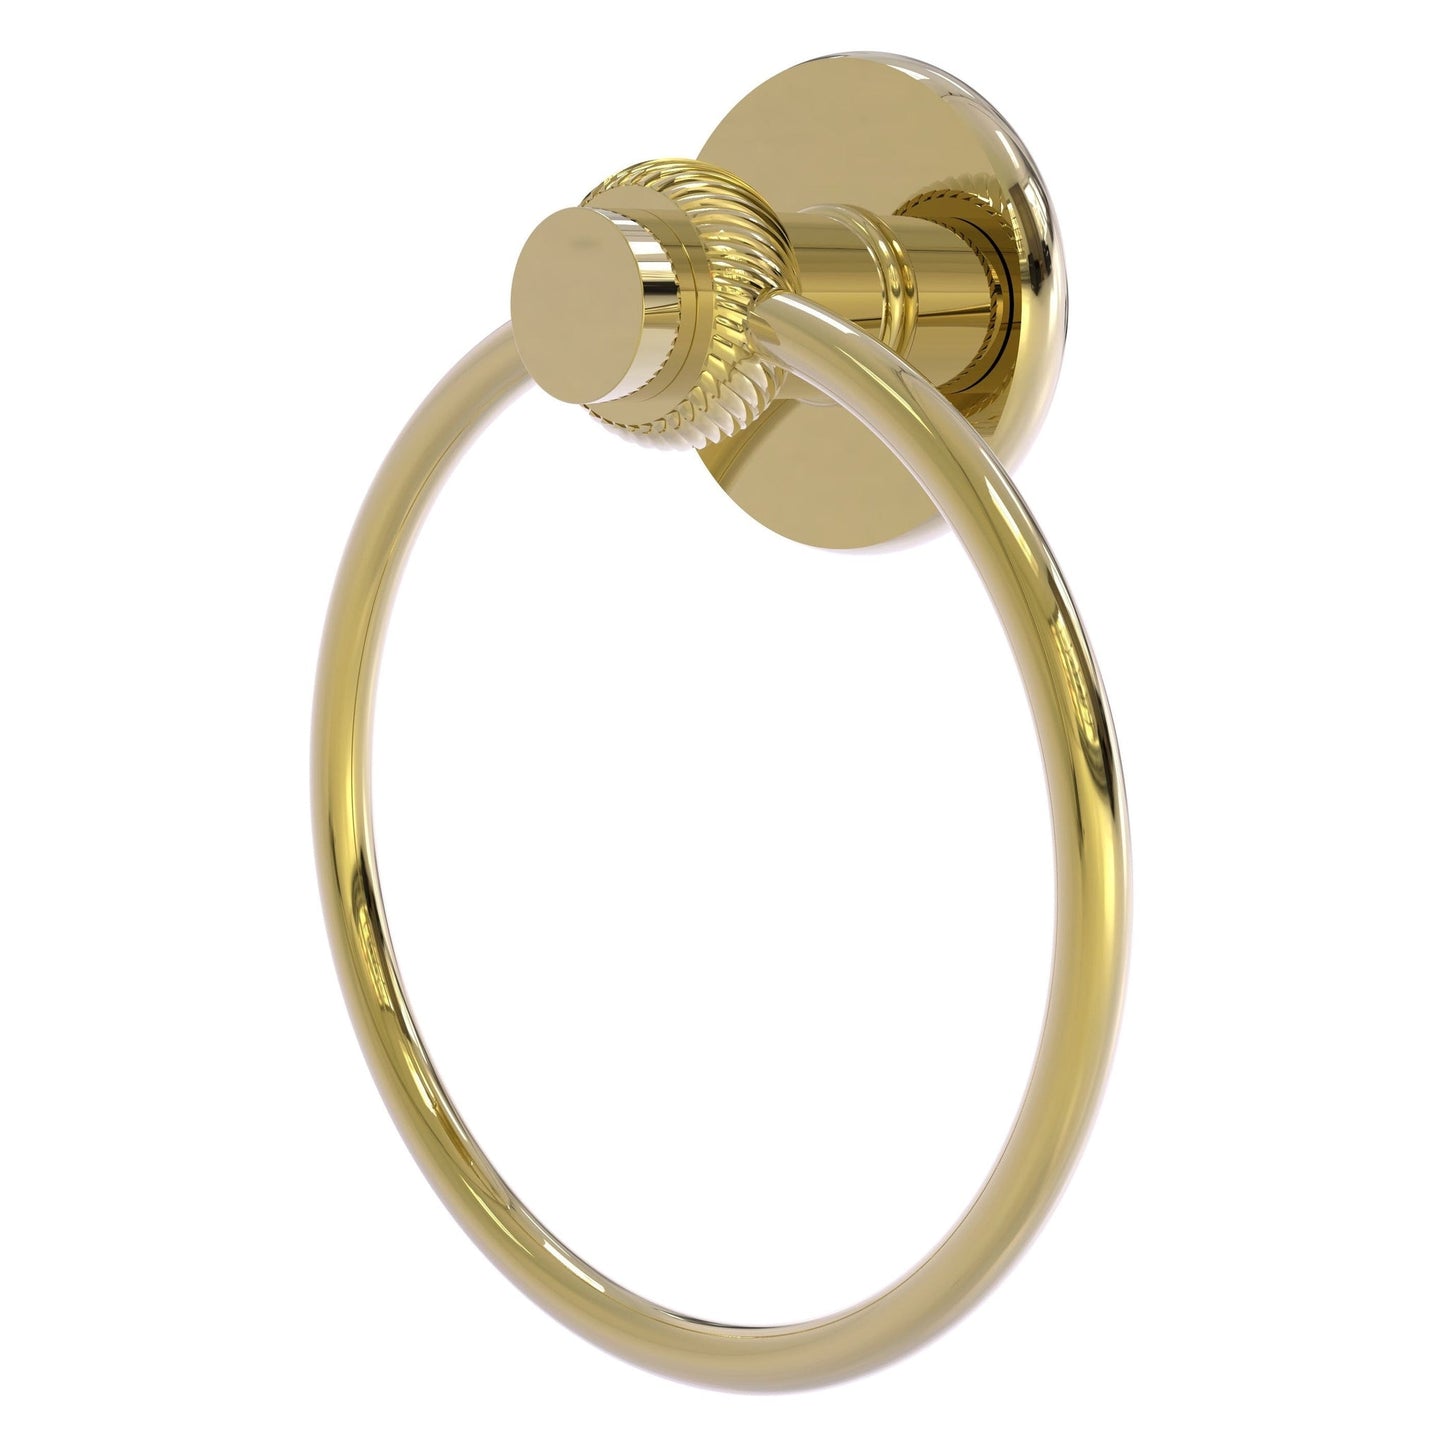 Allied Brass Mercury 6" x 2" Unlacquered Brass Solid Brass Towel Ring With Twist Accent